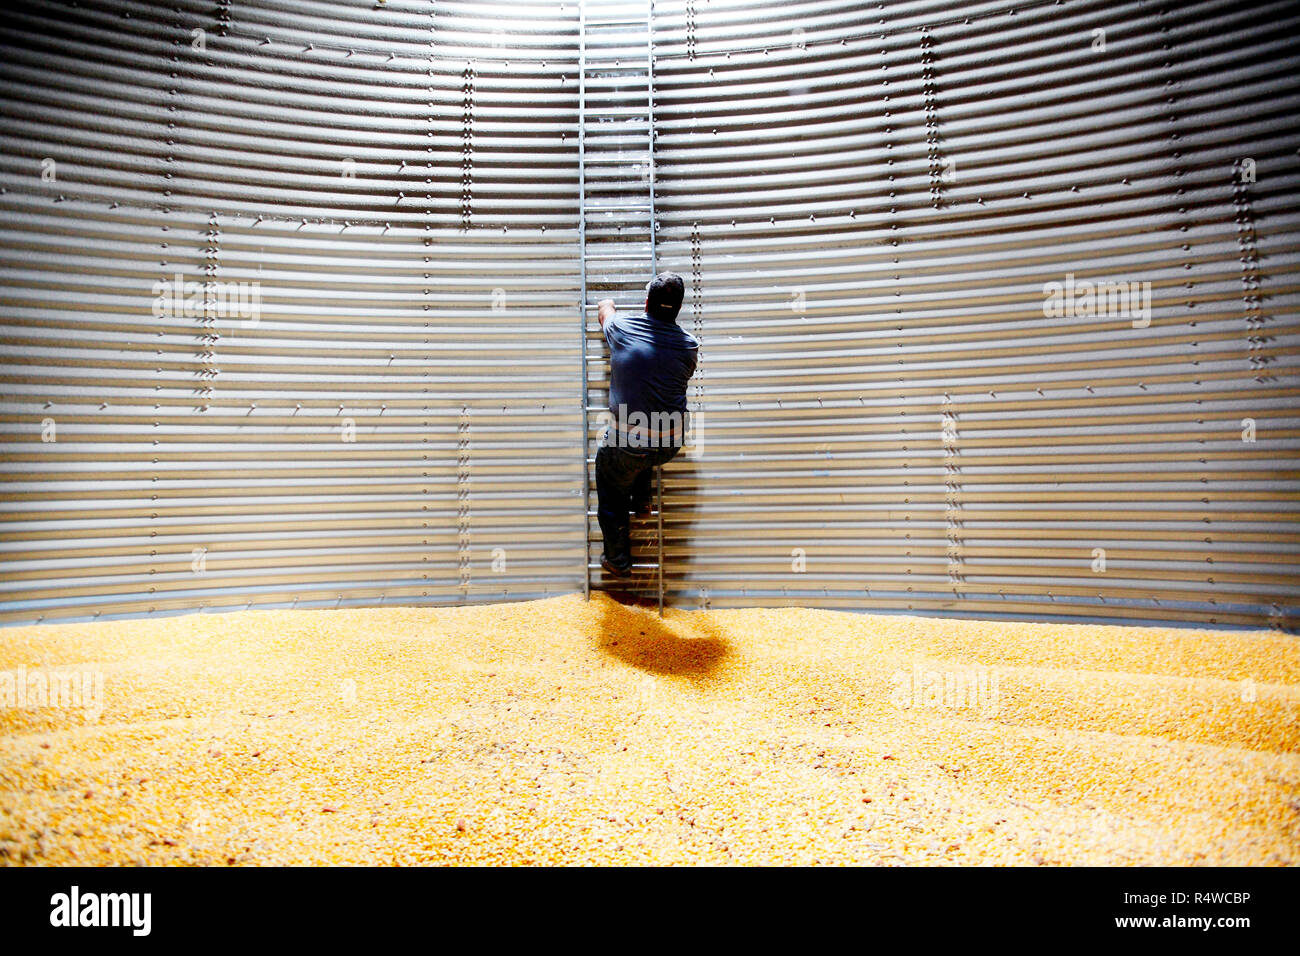 Grain elevator operator Bill Cummins inside a silo full of corn ready to be shipped out. The grain is in storage awaiting a better commodity price. Stock Photo